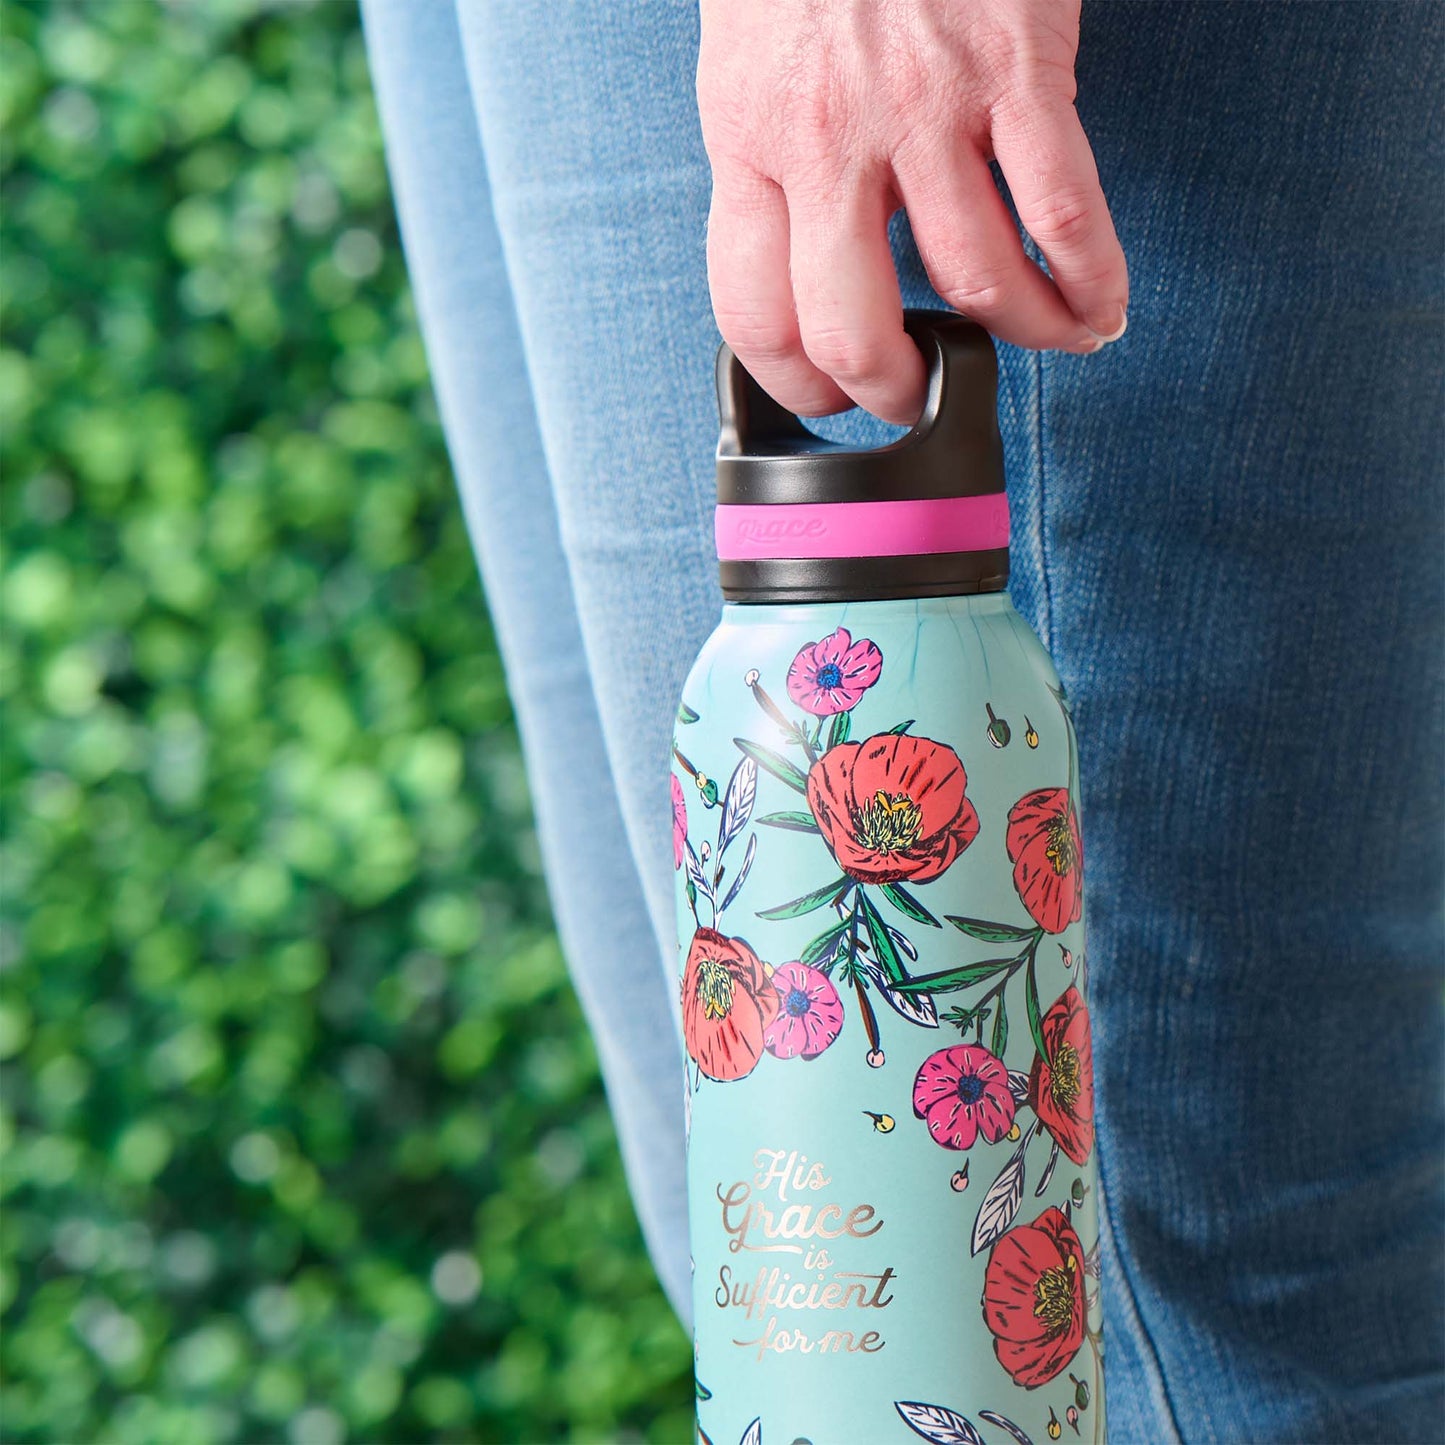 His Grace Stainless Steel Water Bottle - 2 Corinthians 12:9 - The Christian Gift Company